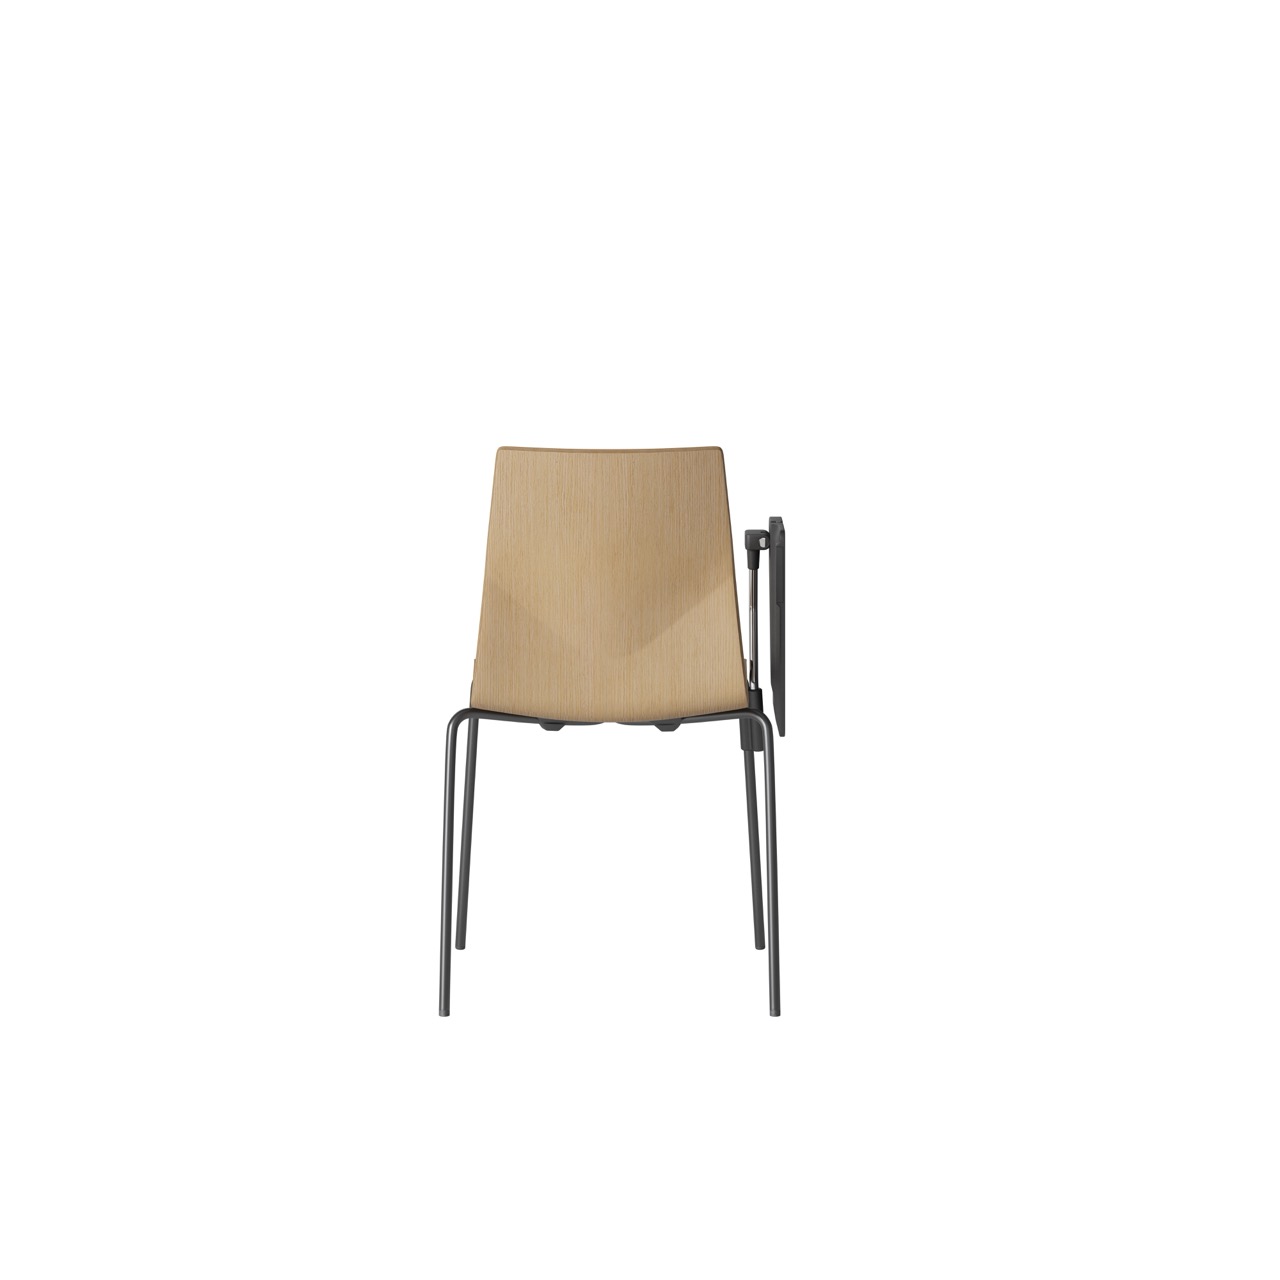 OCEE&FOUR – Chairs – FourCast 2 Four – Veneer shell - Inno Note - Nested - Packshot Image 1 Large